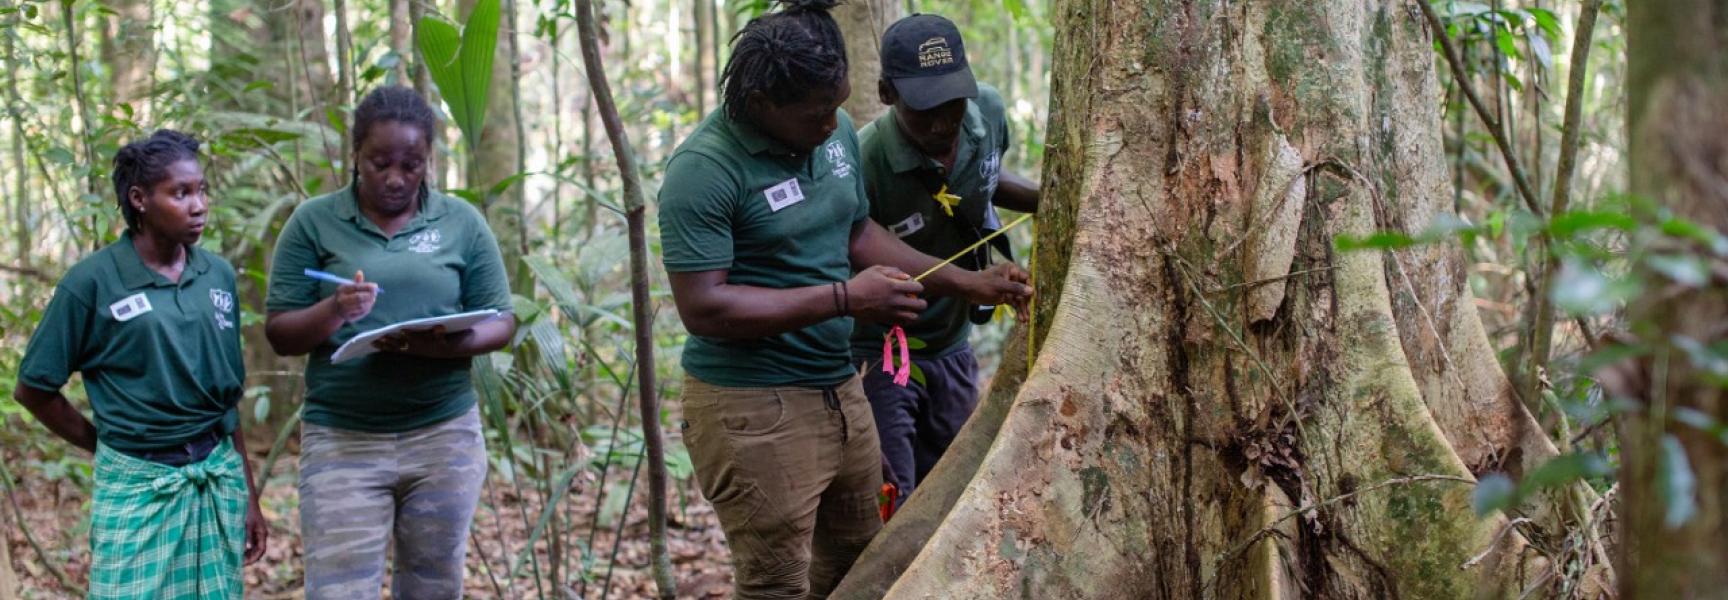 Forests rangers inspecting trees in Suriname